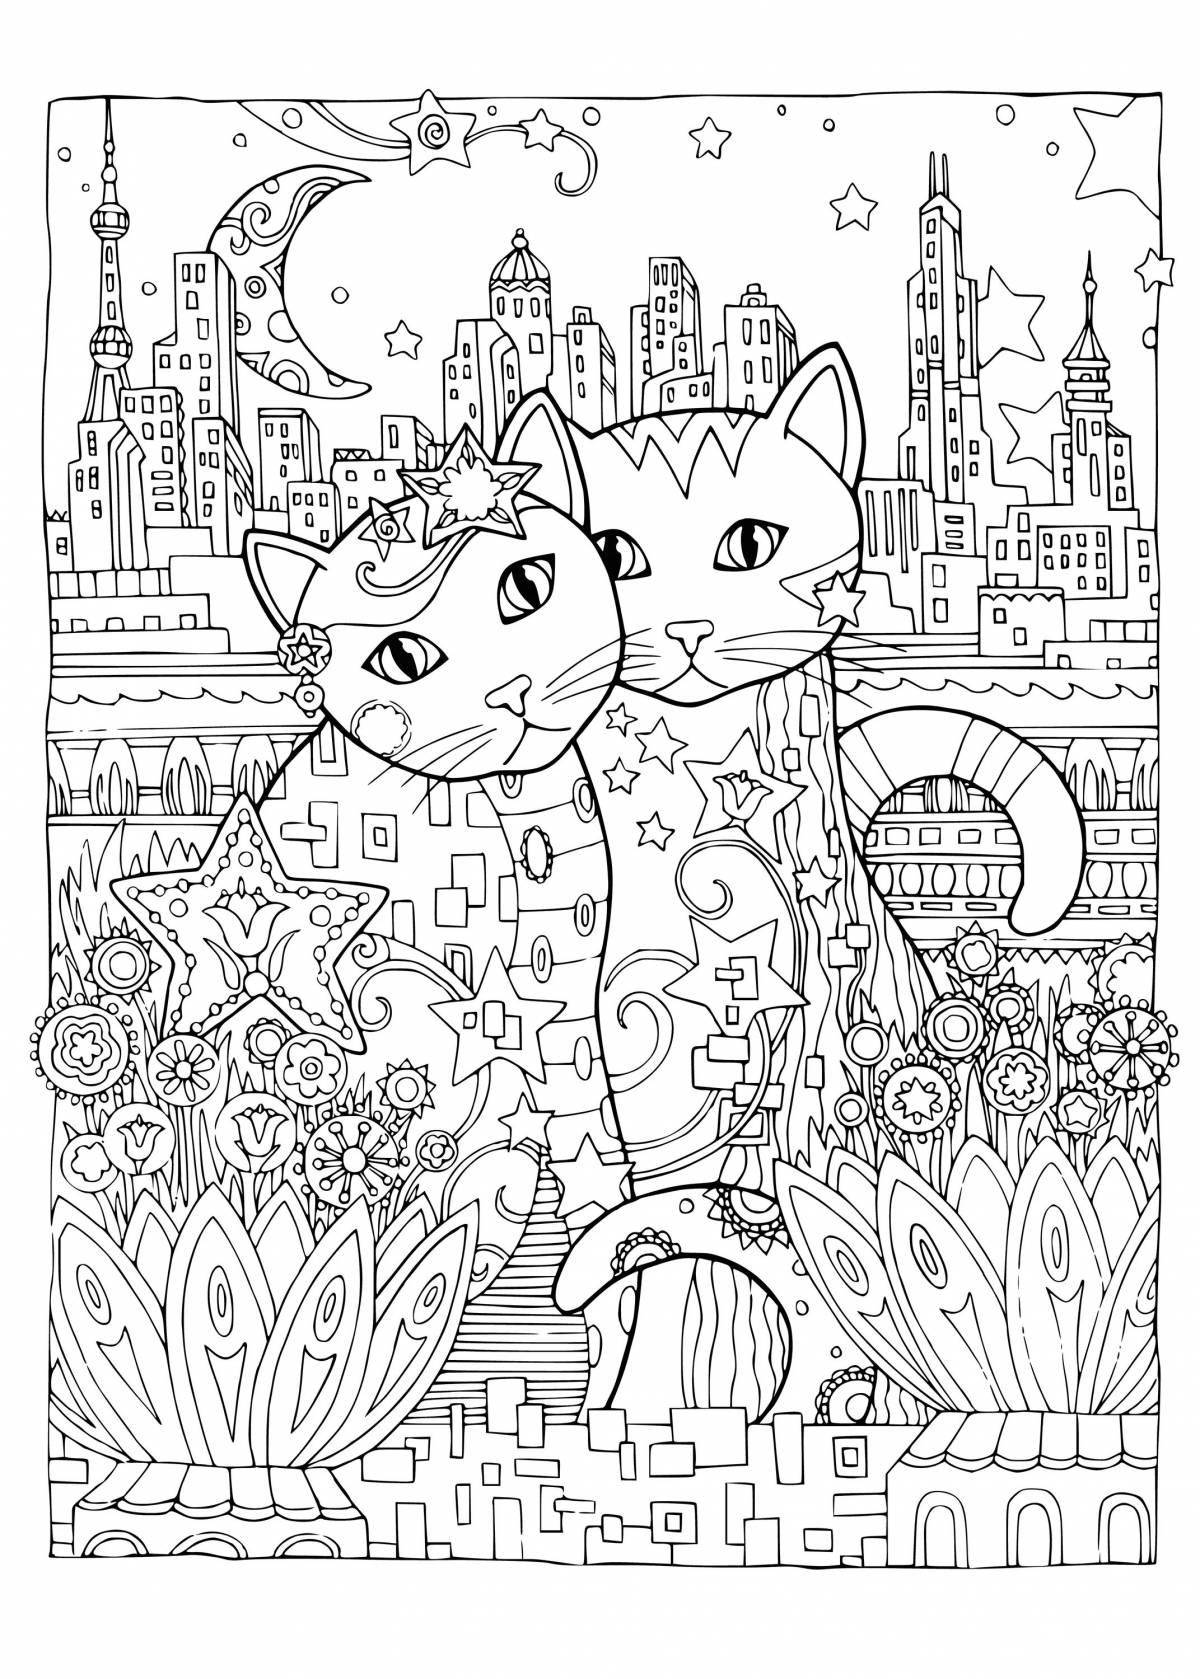 Coloring page elegant magical cats